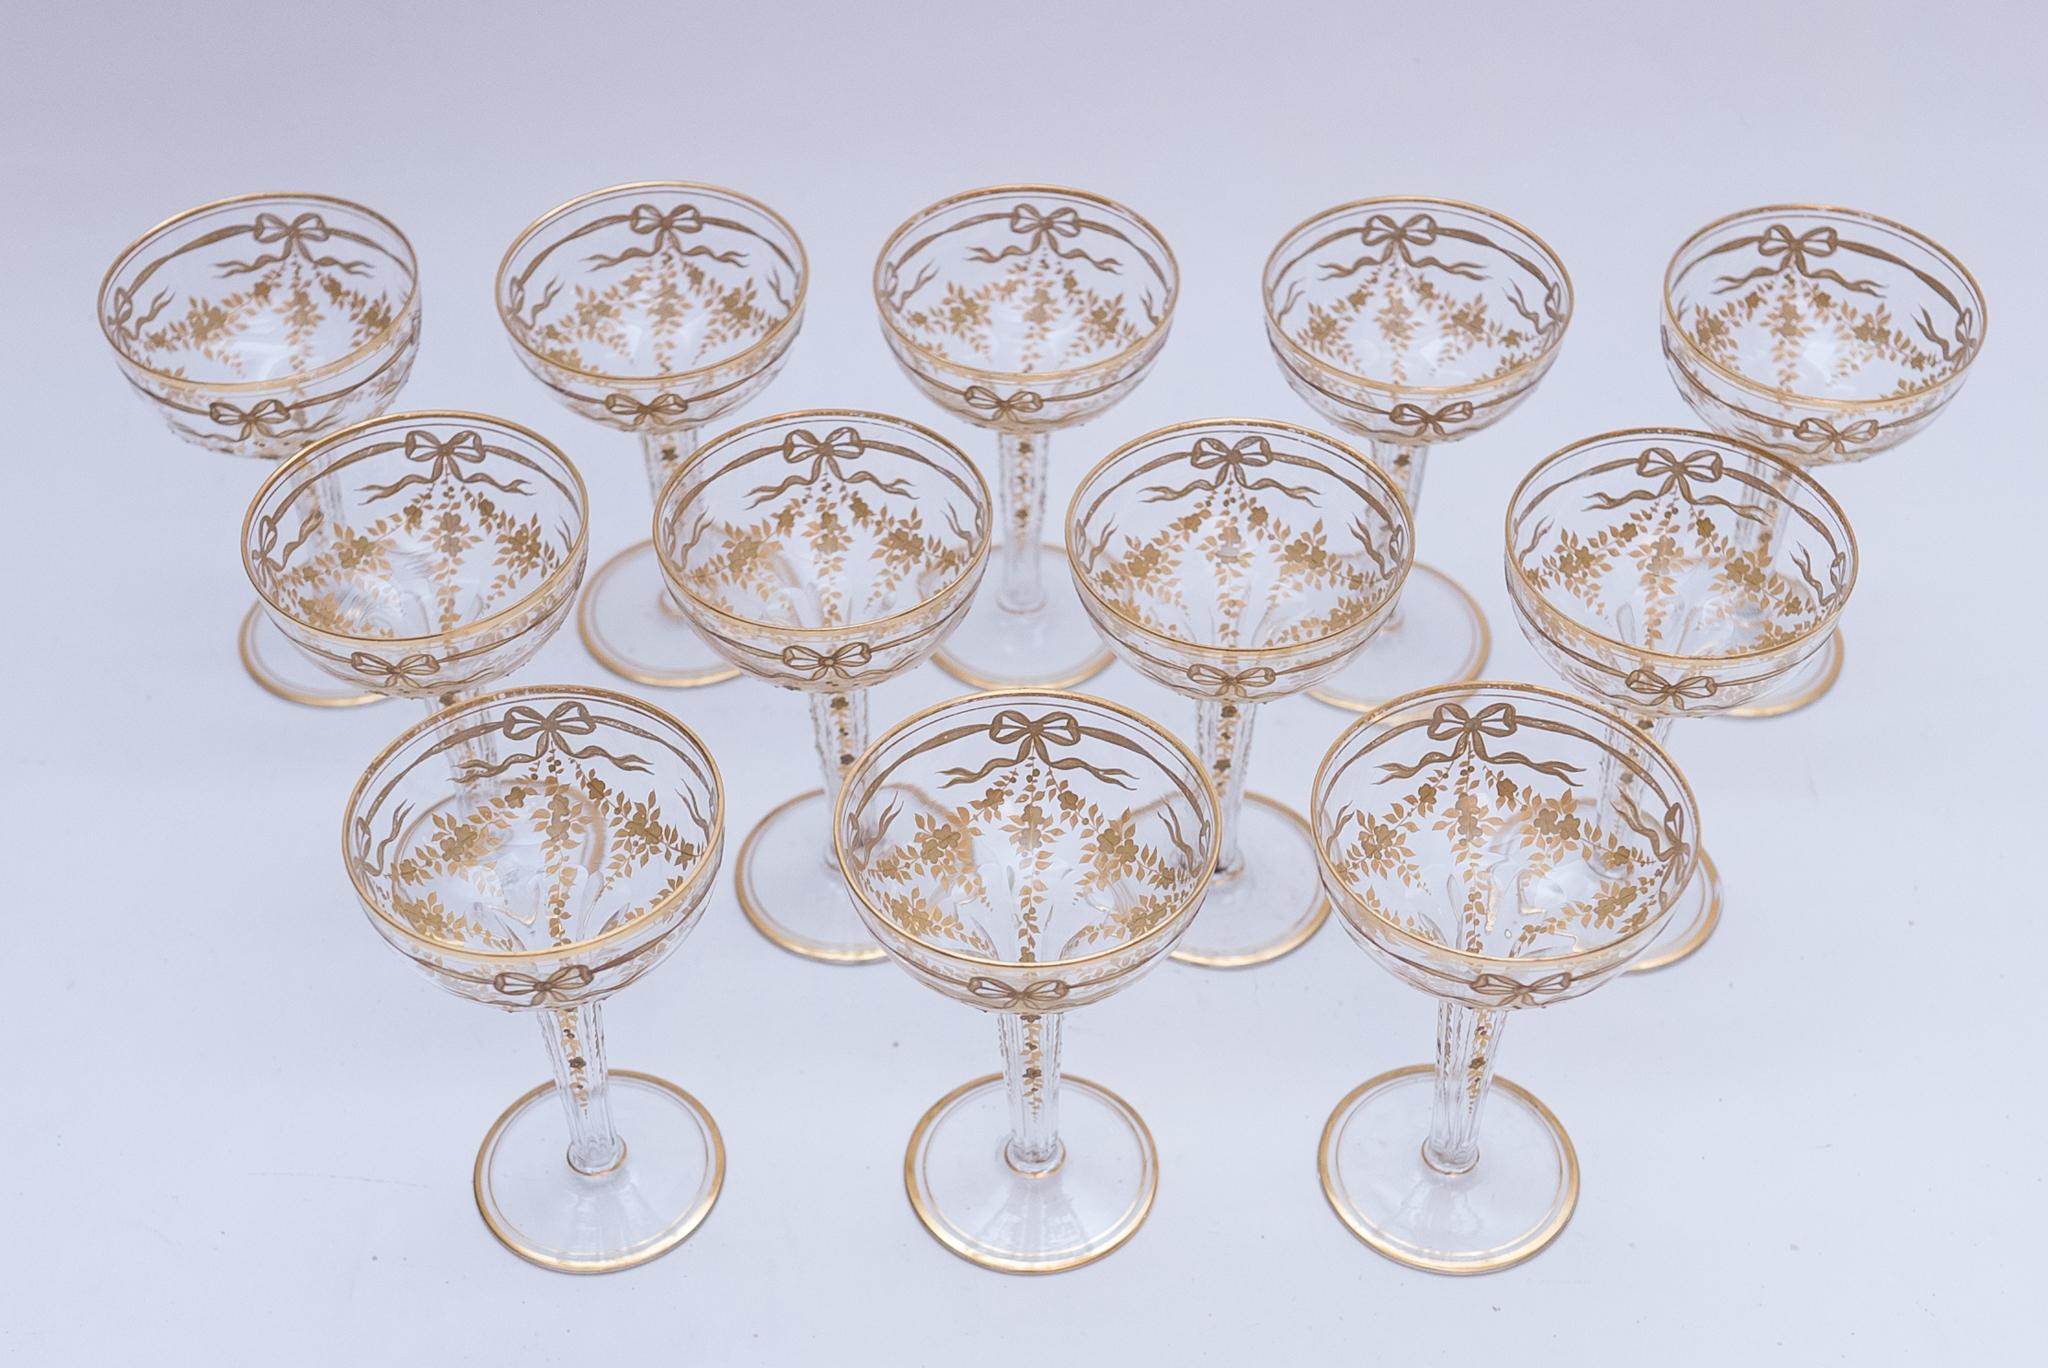 French 12 Antique Hollow Stem Champagne Coupes, Raised Gilding Throughout, Cut Stem